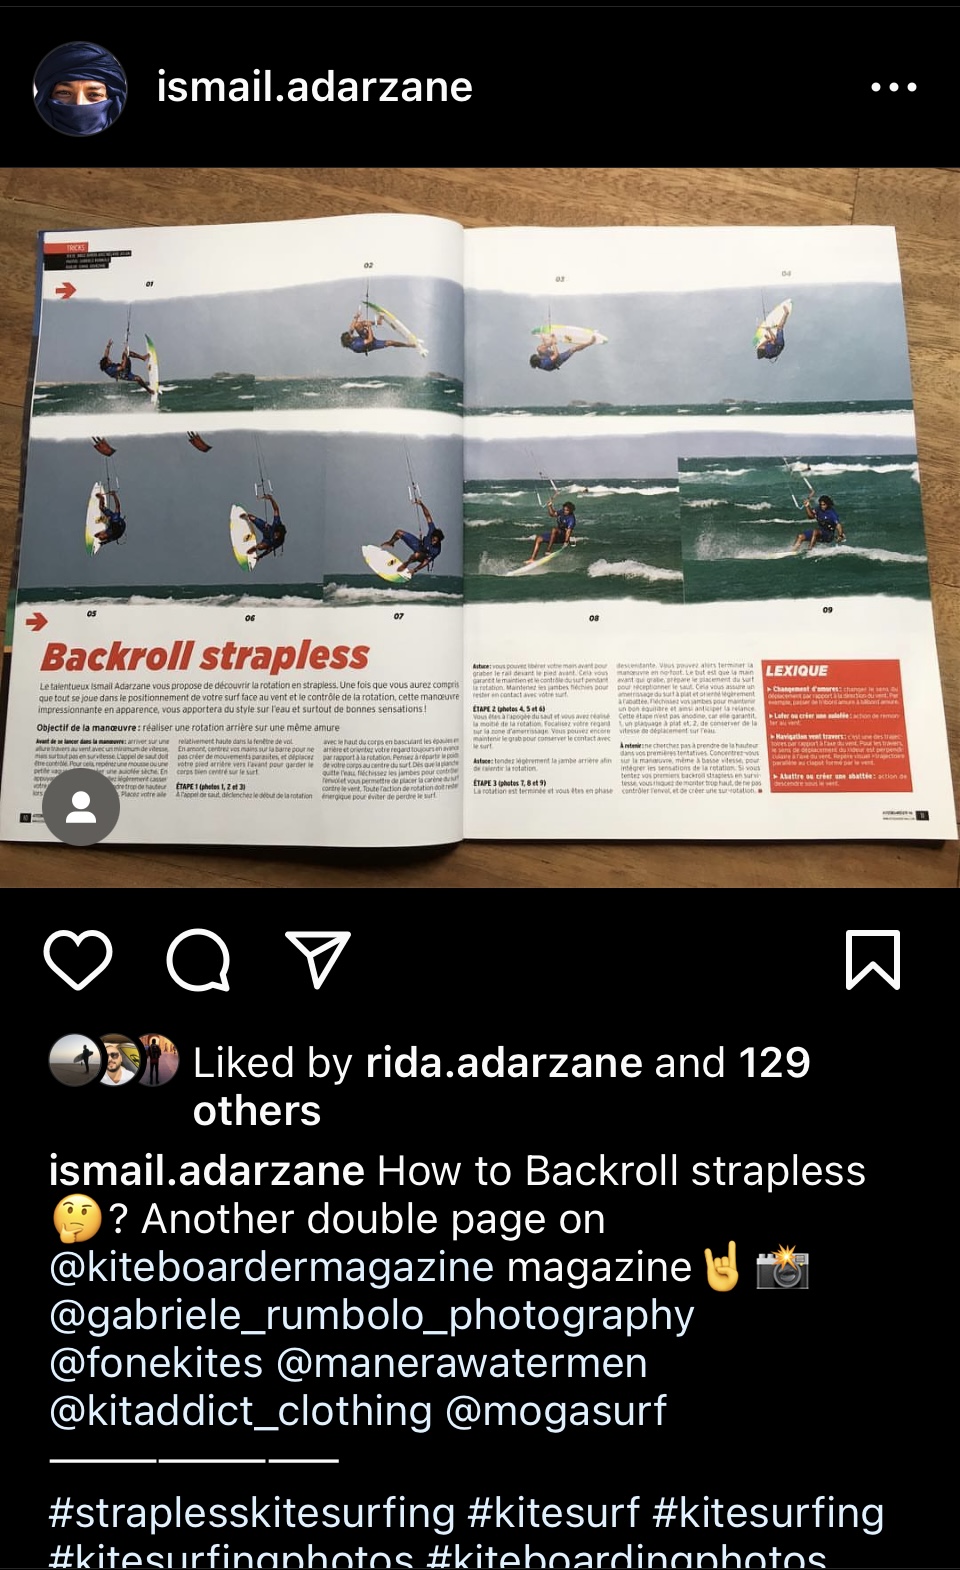 How to bankroll strapless double page feature of Ismail Adarzane Kitesurfer in Kiteboarding Magazine